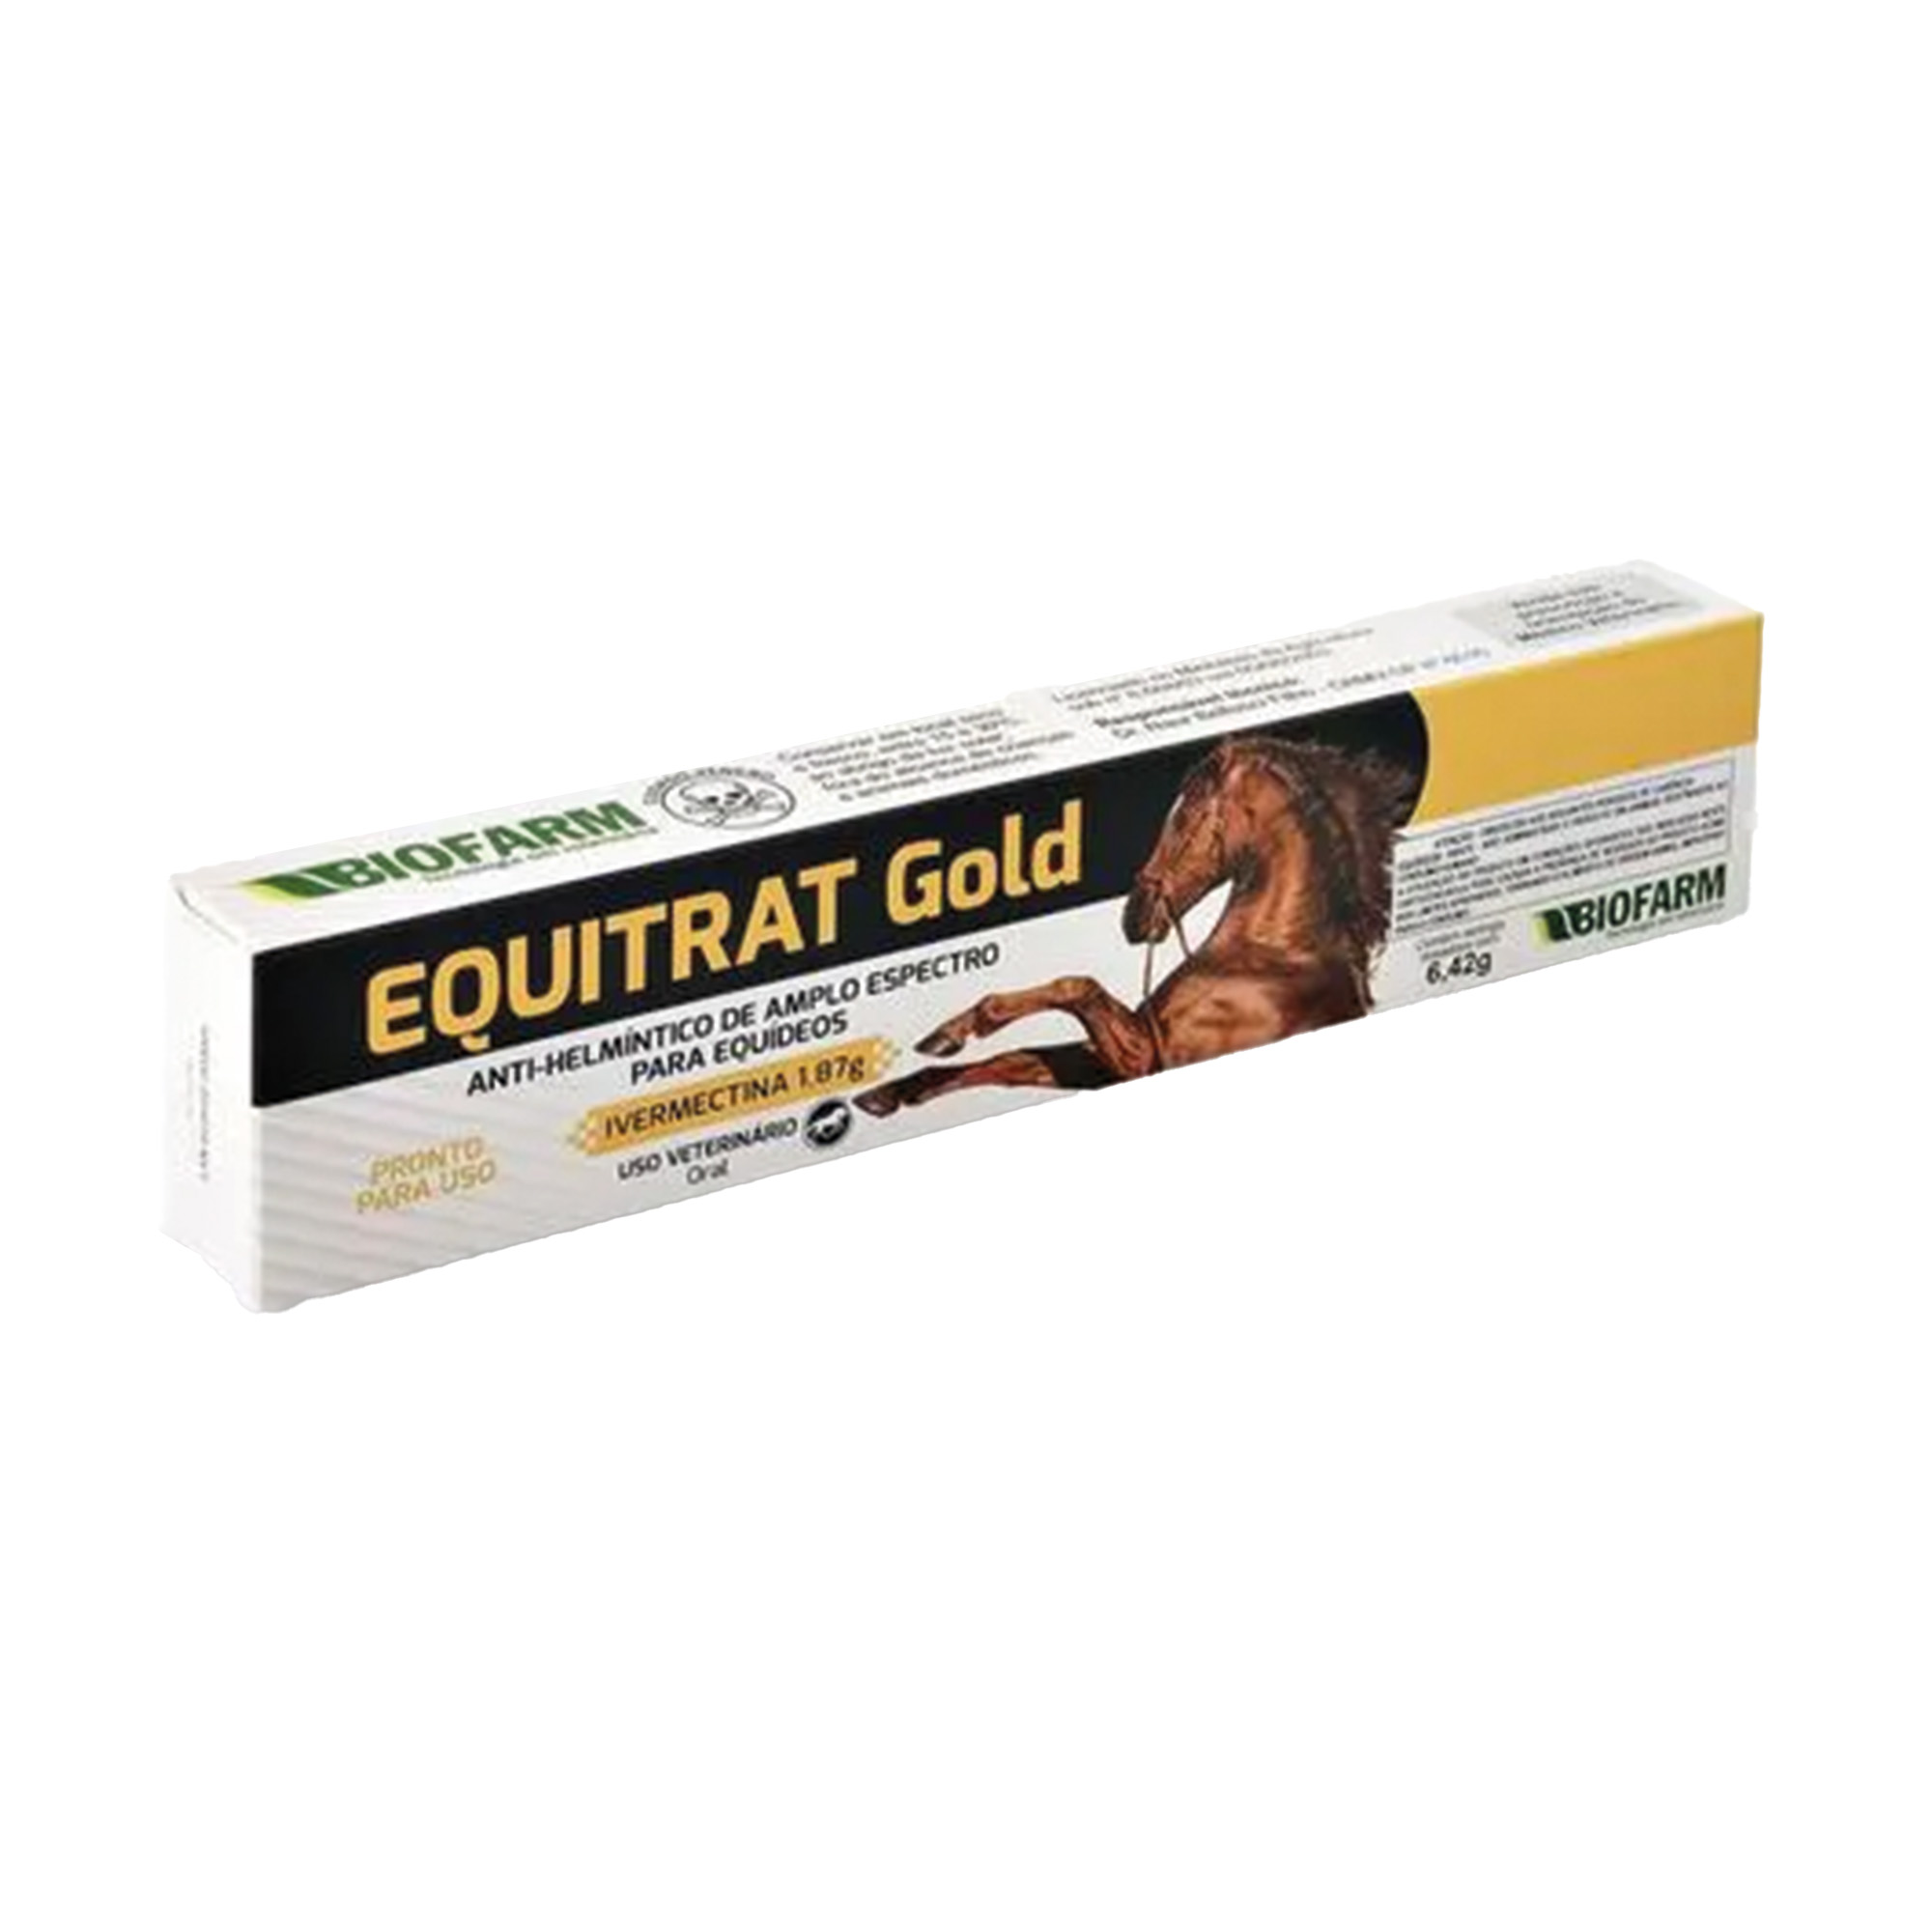 Equitrat Gold 6,42g - Foto 1